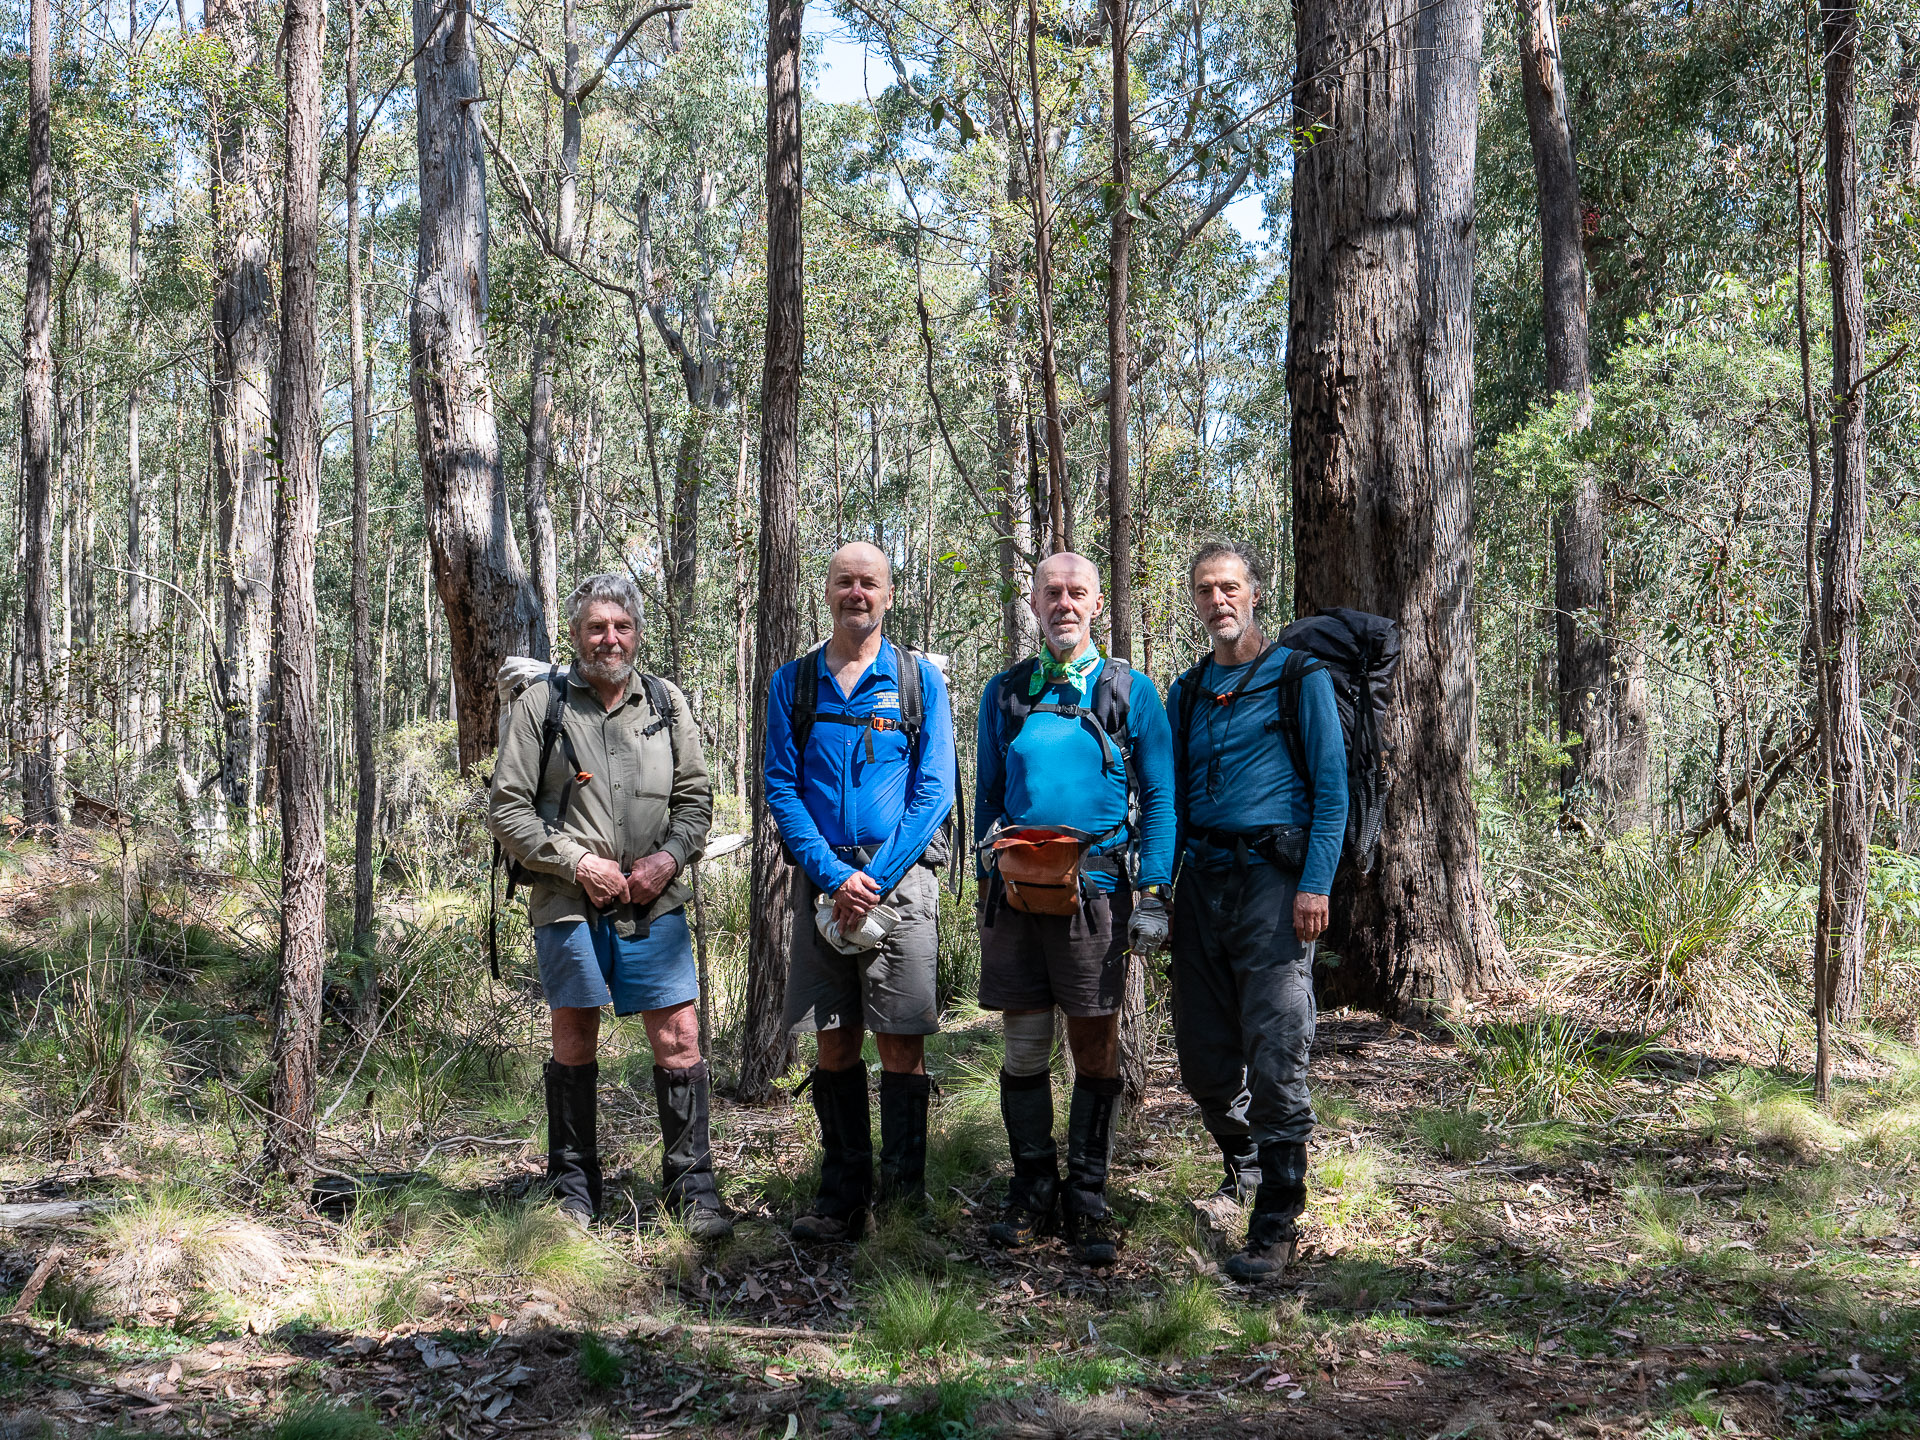 End of trip photo - Ian, Geoff, self and Edward (image G. Luscombe)